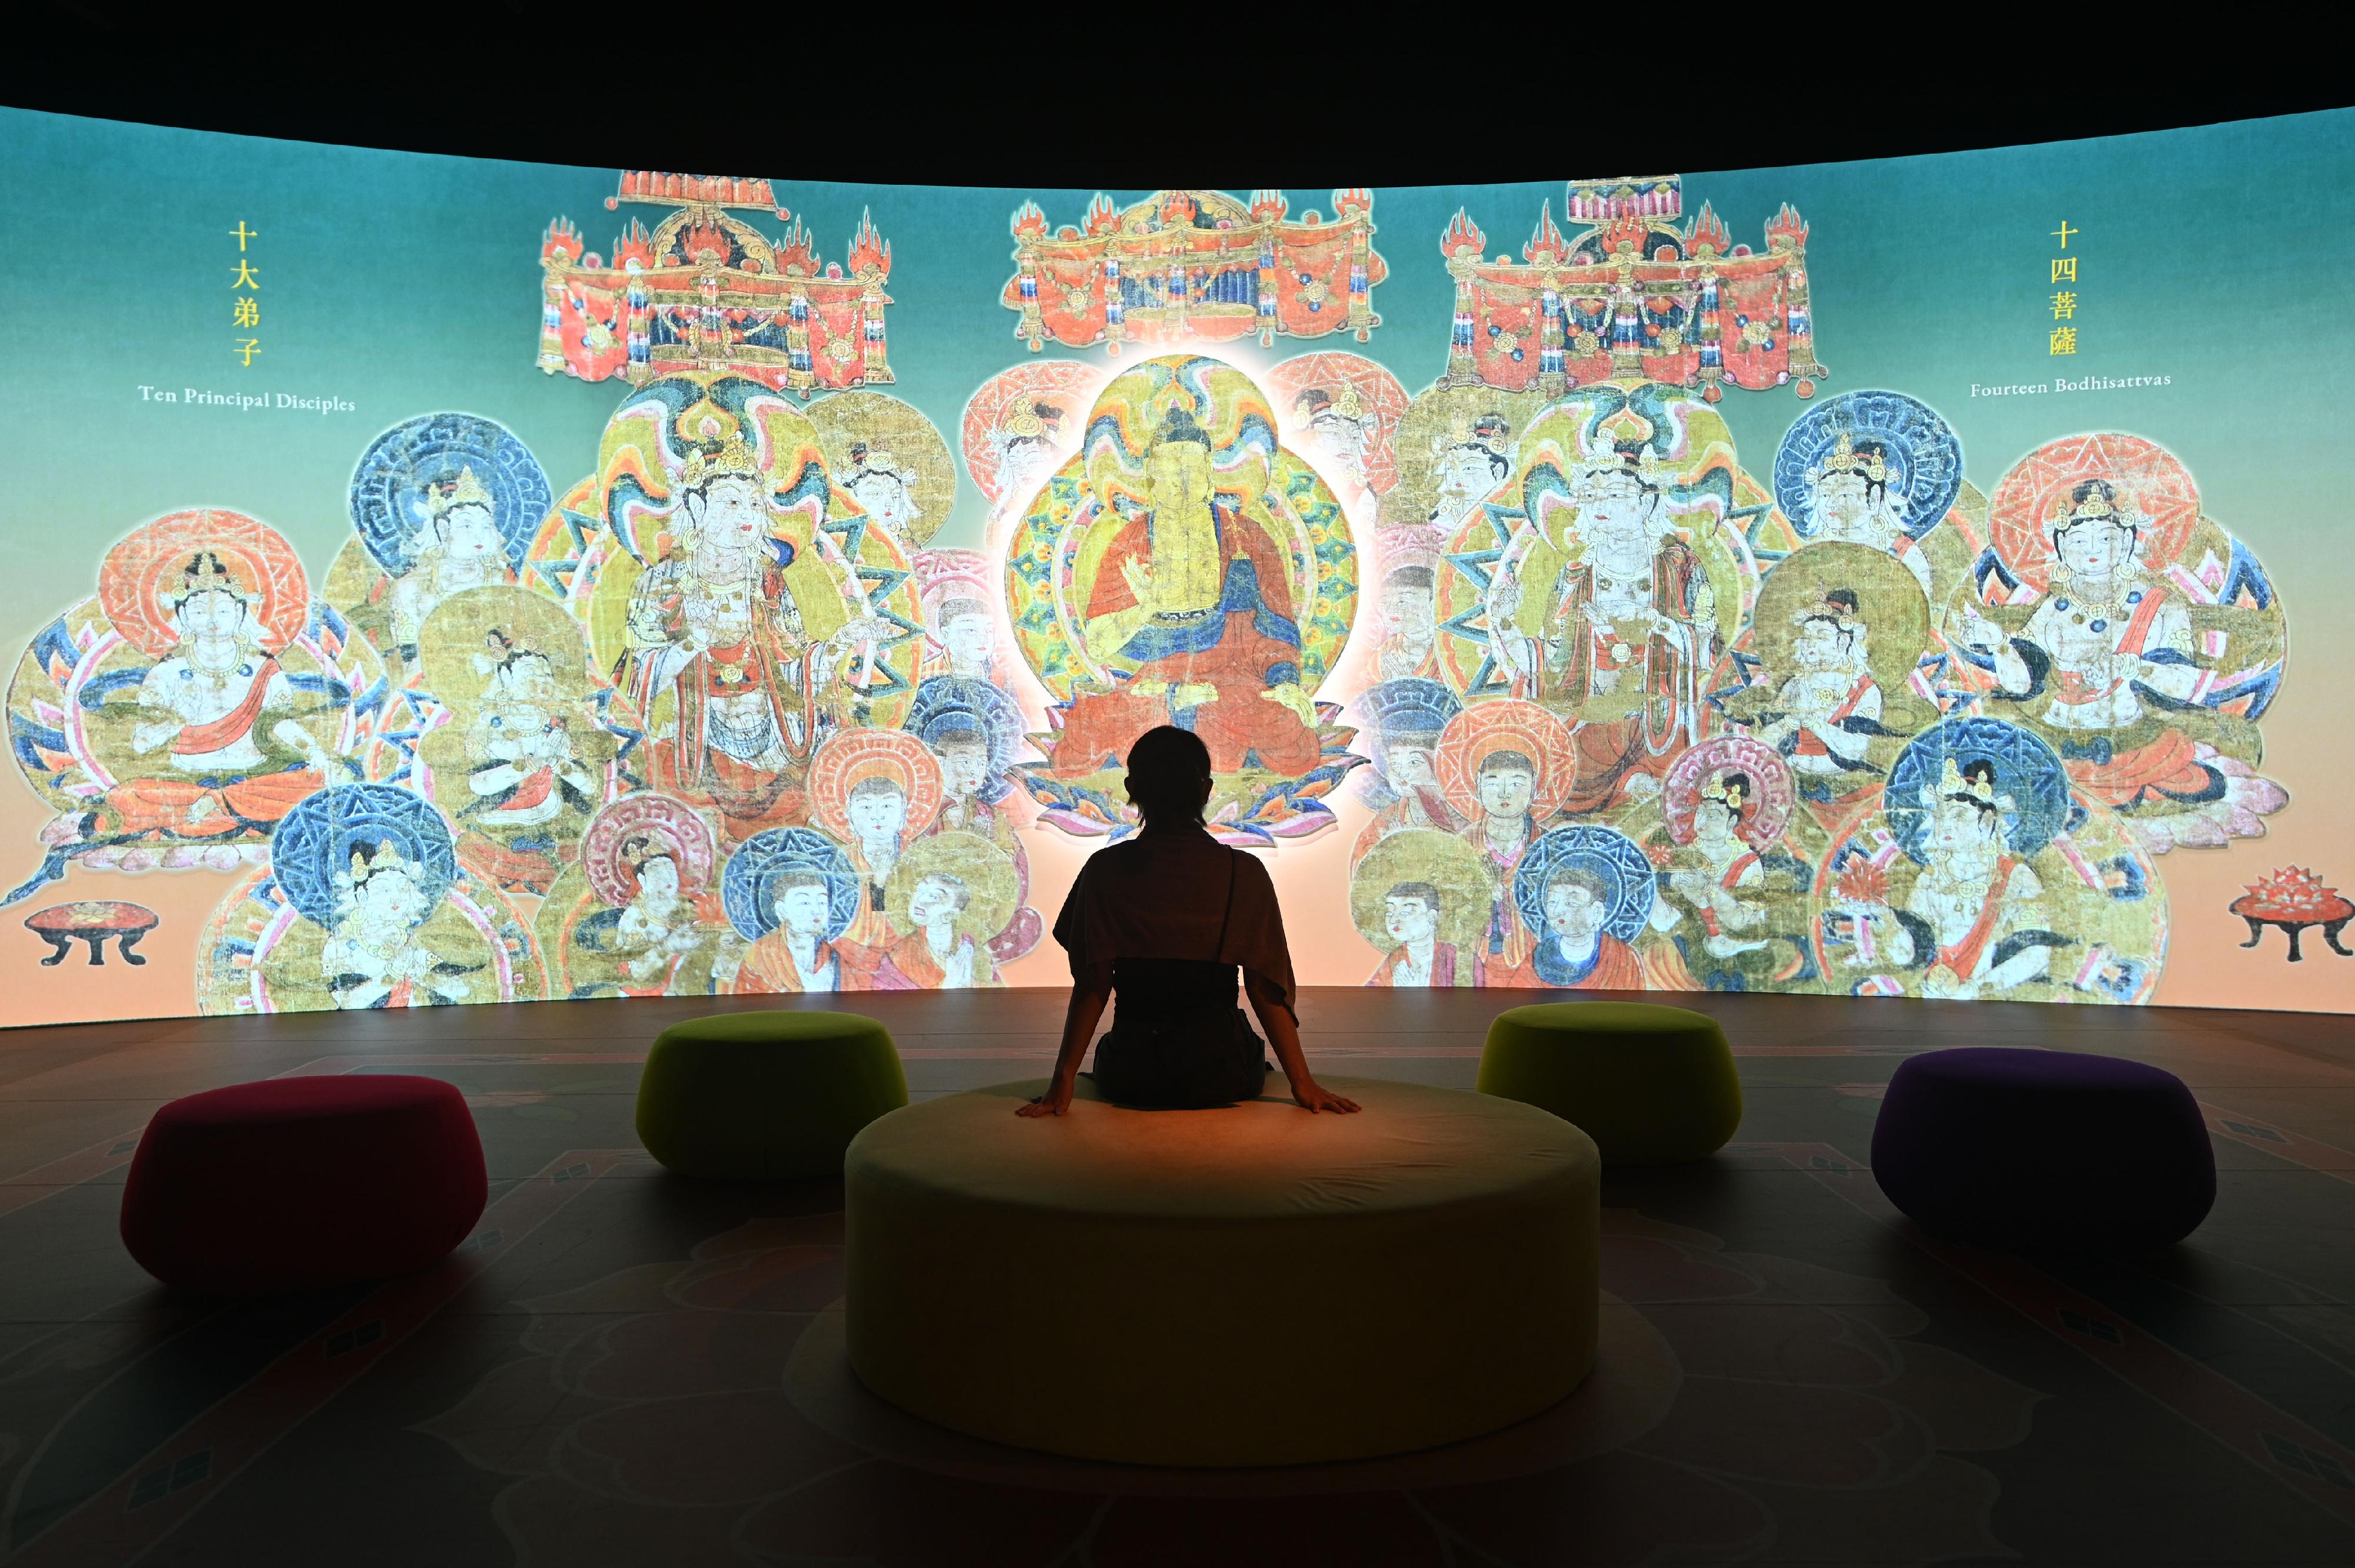 The opening ceremony for the exhibition "The Hong Kong Jockey Club Series: Dunhuang: Enchanting Tales for Millennium" was held today (August 23) at the Hong Kong Heritage Museum. Picture shows an immersive digital programme featuring the illustration of the "Sutra of the Profundity of Filial Love" silk  painting of the Northern Song dynasty, allowing visitors to appreciate the parental bonding conveyed by a series of heart-warming stories on the painting.
